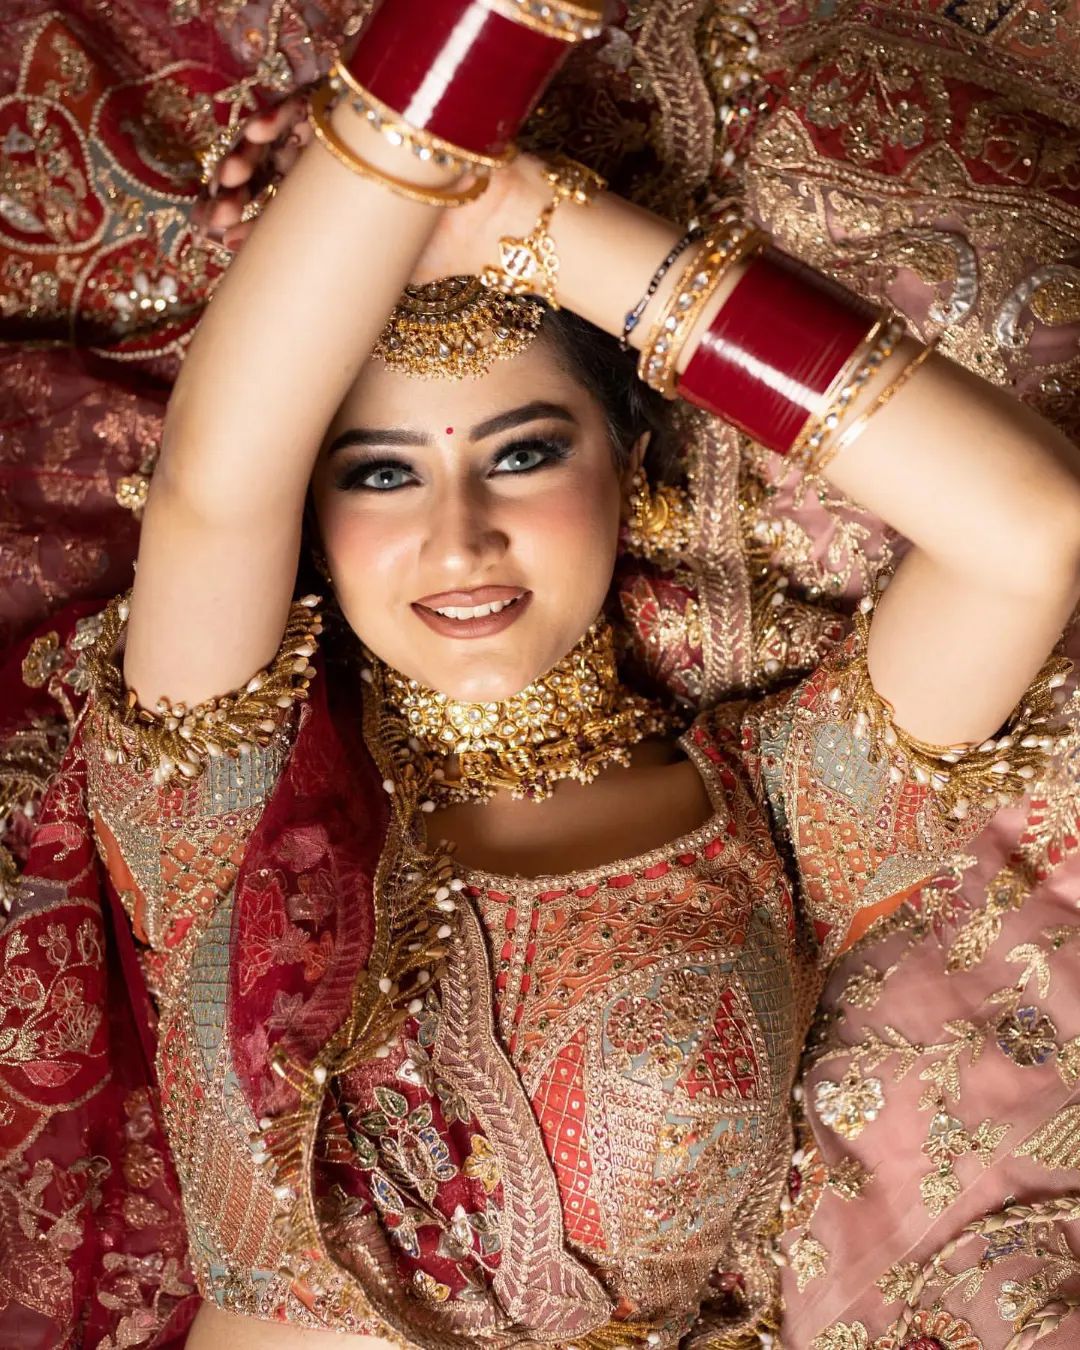 Dulhan Hand Royalty-Free Images, Stock Photos & Pictures | Shutterstock